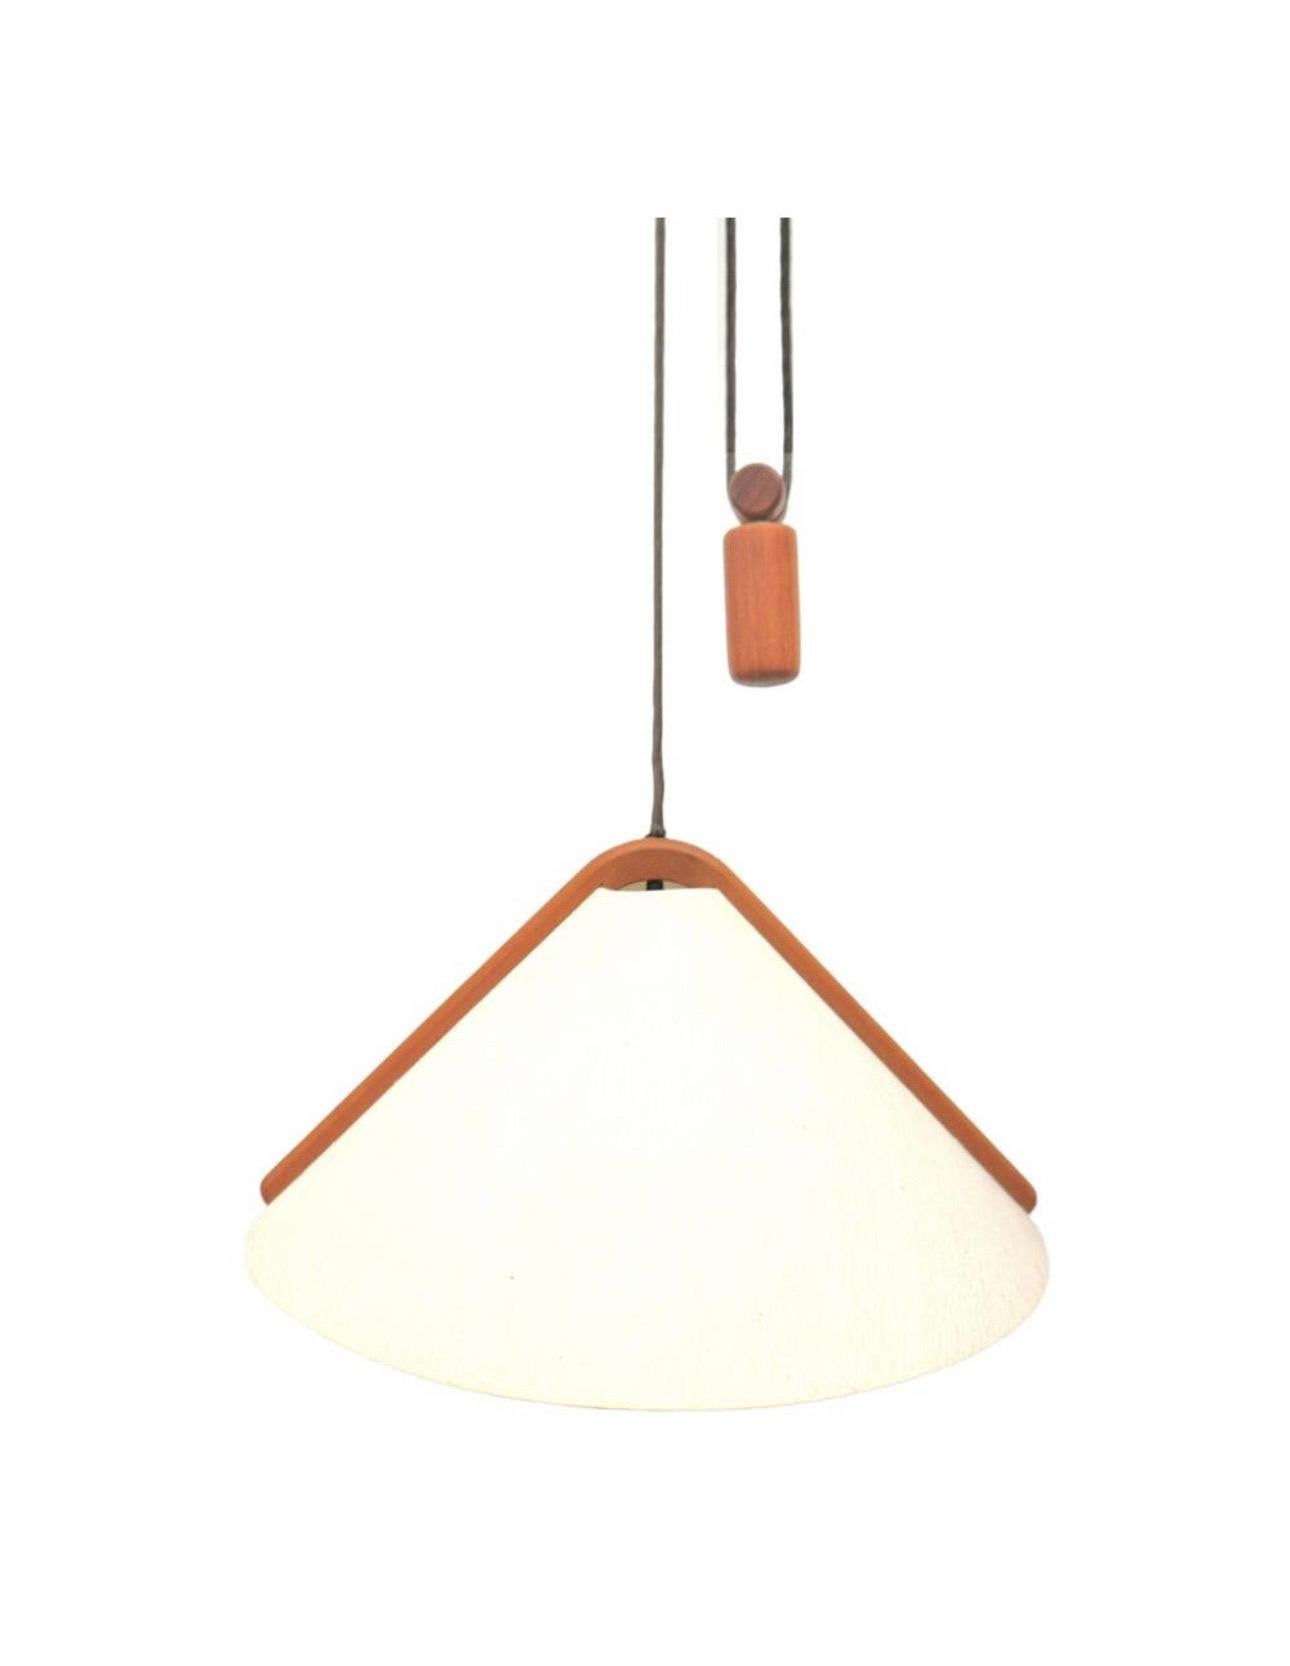 A very cool and rare MCM Danish modern adjustable teak pendant lamp with counterweight by Domus, circa 1970s. The lamp is in very good vintage condition and measures 23.5